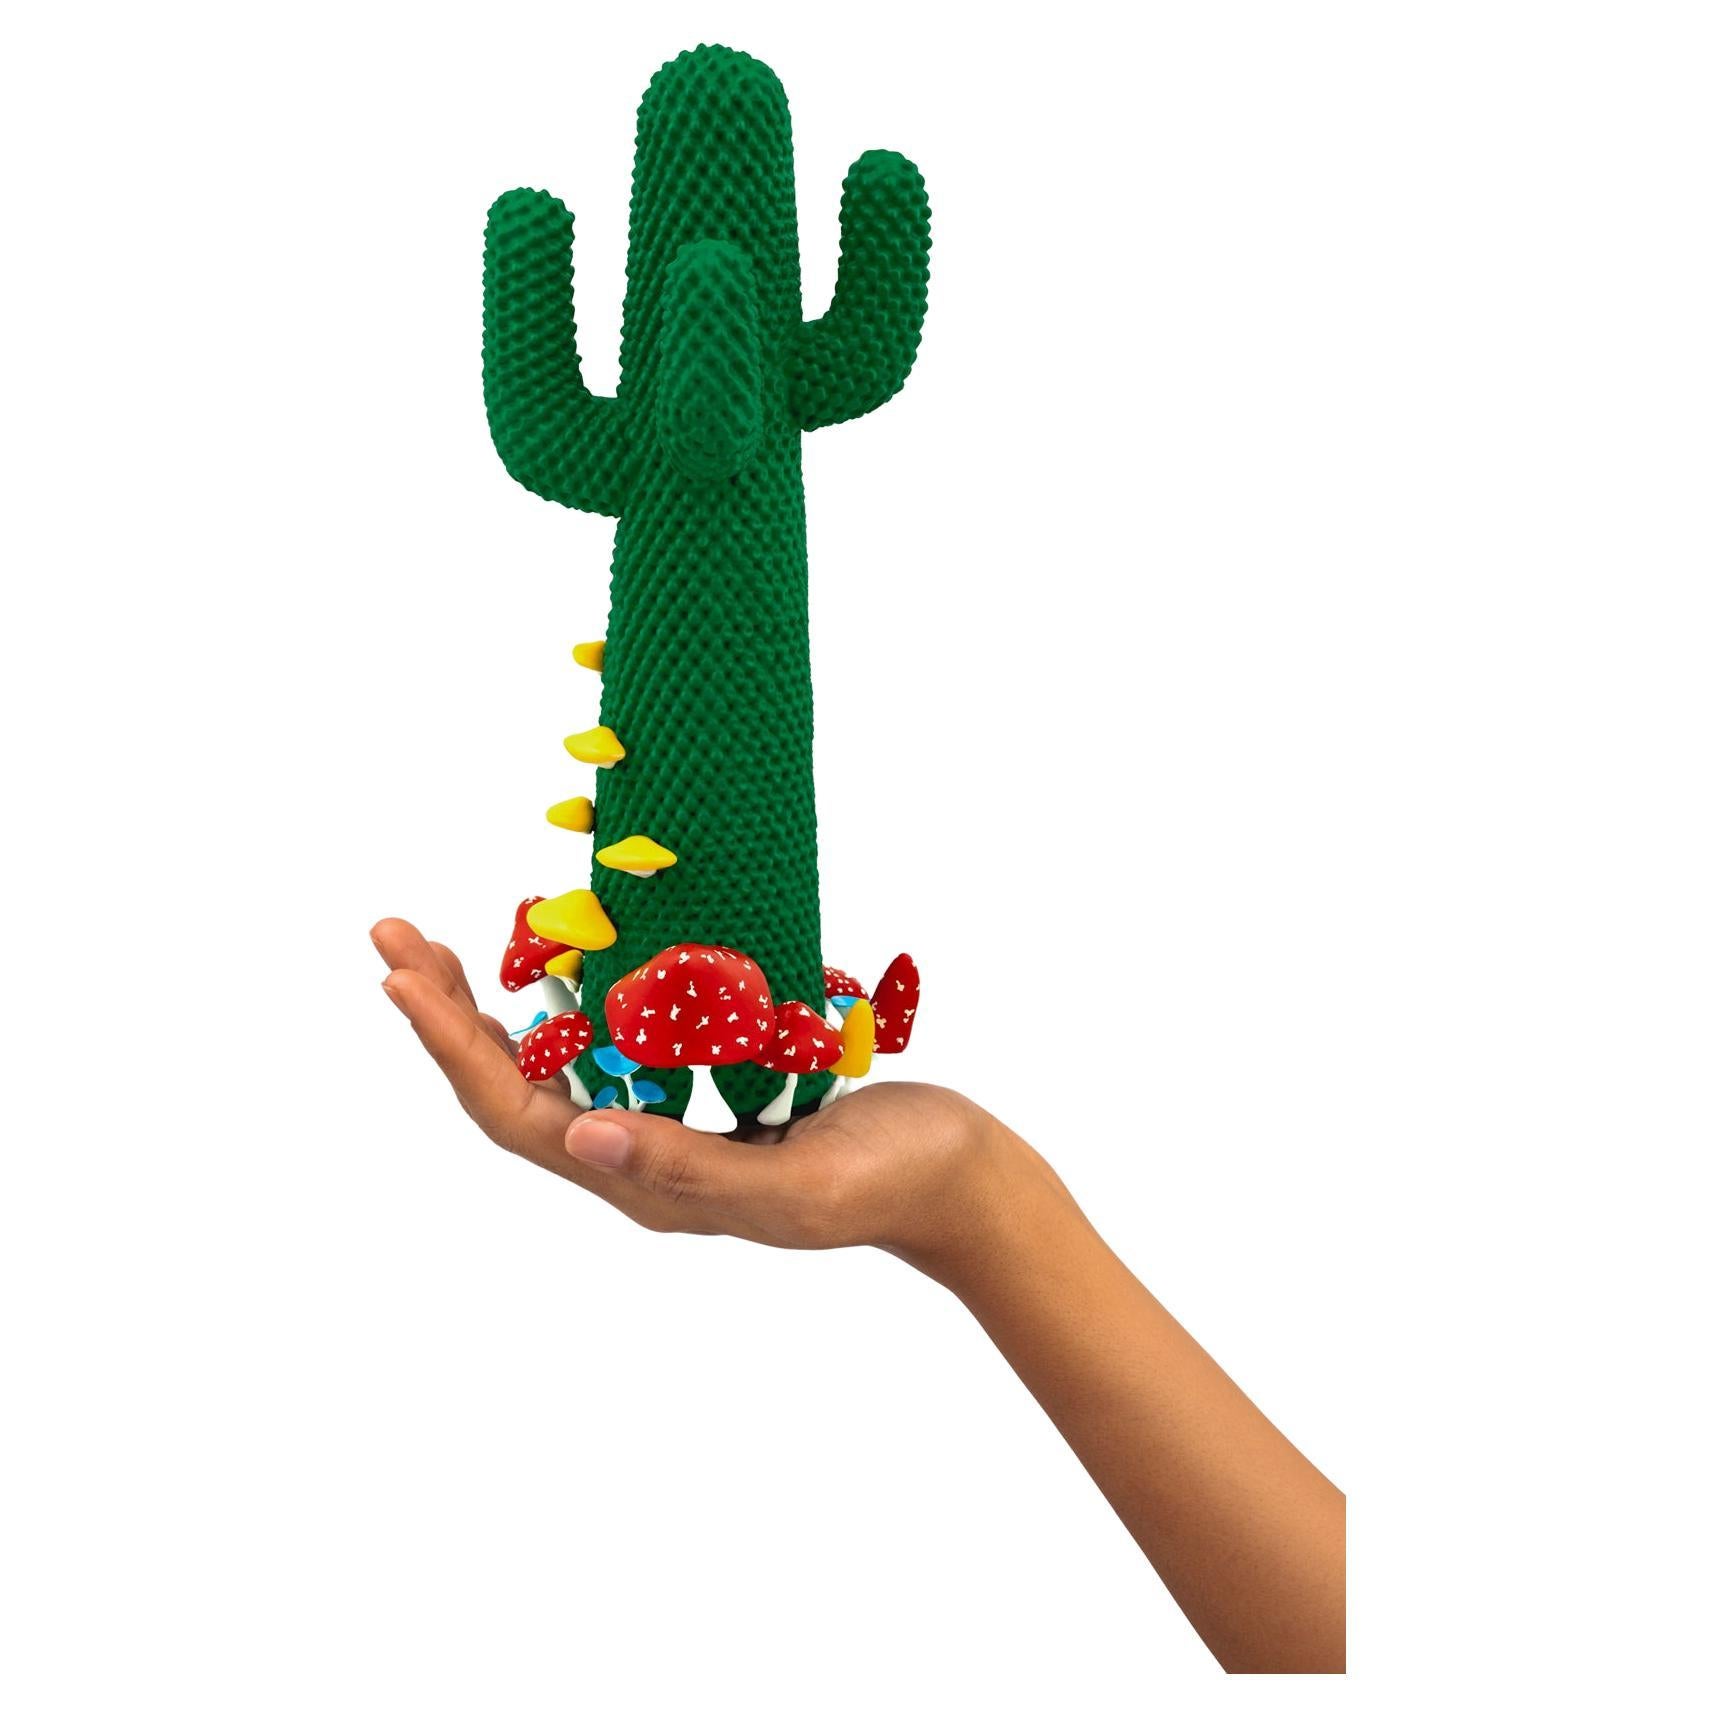 Limited edition #16/99

Gufram presents the miniaturised version of the Shroom CACTUS® created in collaboration with A$AP Rocky and the artist’s new design studio HOMMEMADE Exactly as the real-size Shroom CACTUS®, the new Guframini piece features